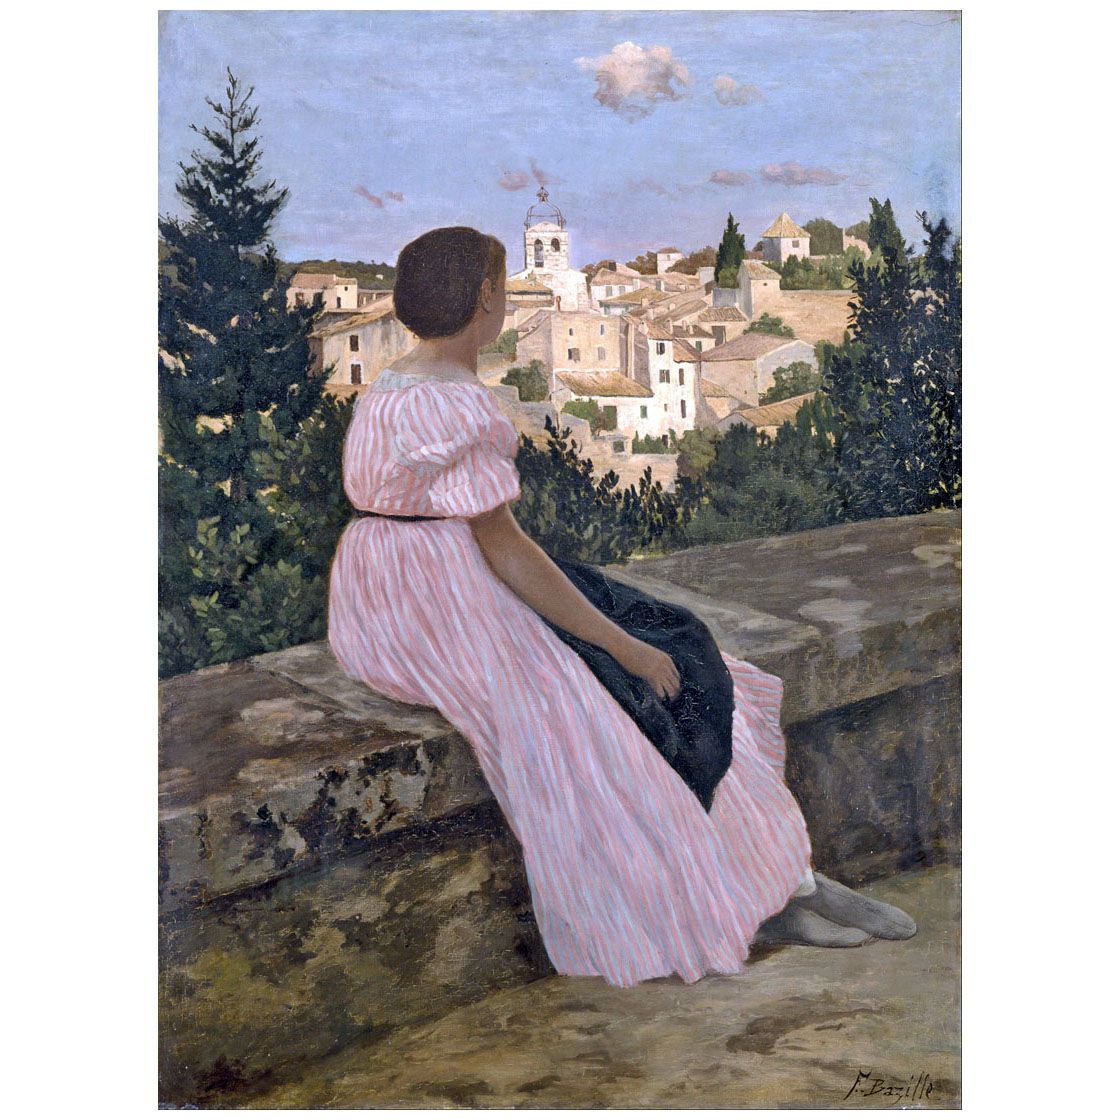 Frederic Bazille. La Robe rose. 1864. Musee d’Orsay